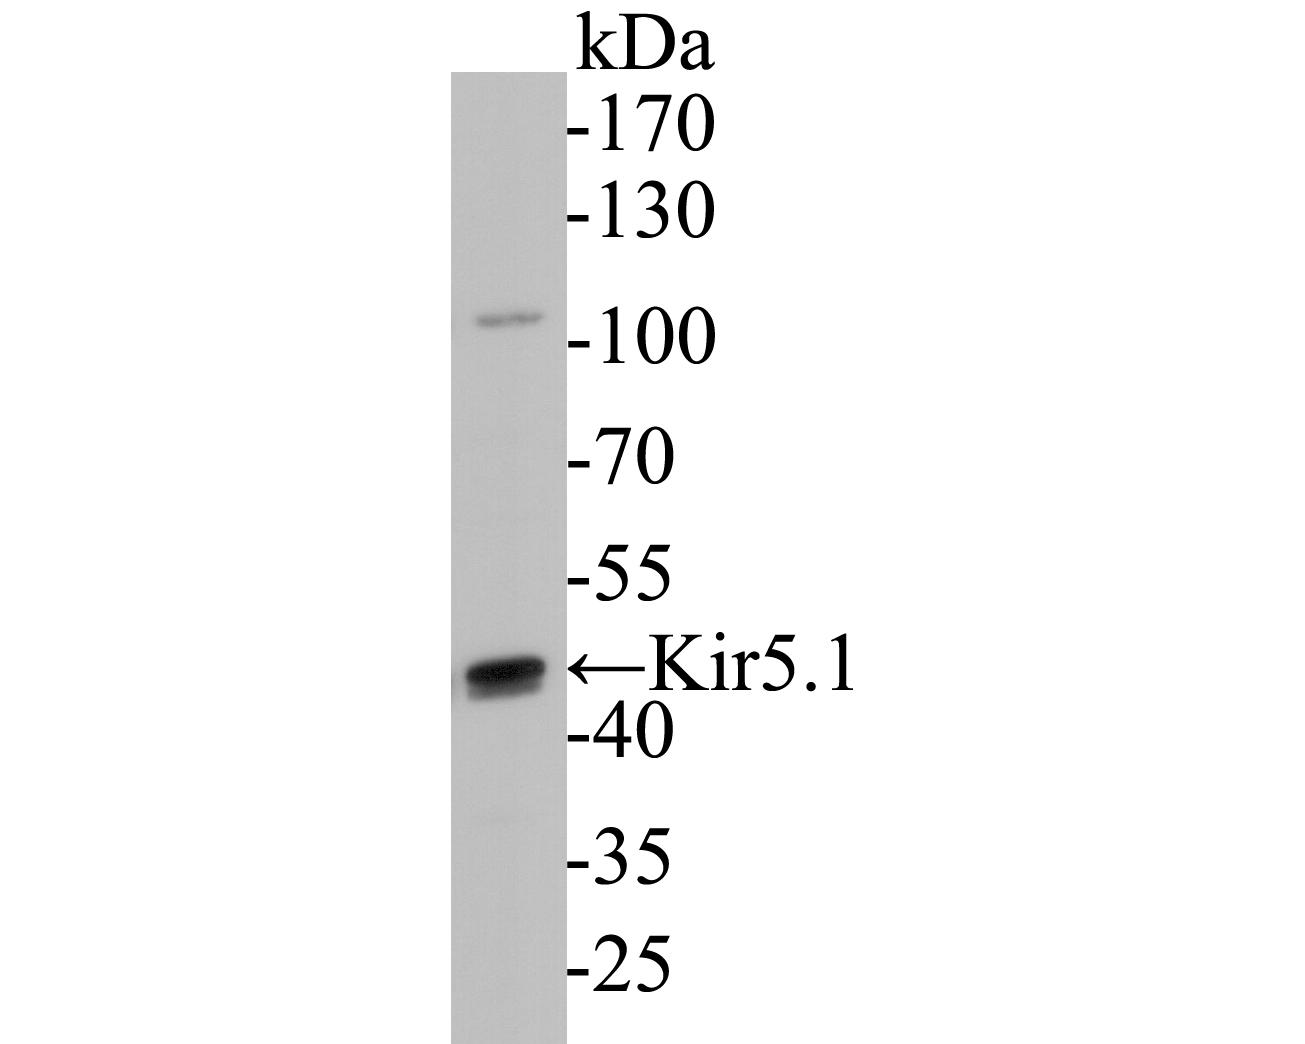 Western blot analysis of Kir5.1 on mouse kidney tissue lysate. Proteins were transferred to a PVDF membrane and blocked with 5% BSA in PBS for 1 hour at room temperature. The primary antibody (ER1901-24, 1/2000) was used in 5% BSA at room temperature for 2 hours. Goat Anti-Rabbit IgG - HRP Secondary Antibody (HA1001) at 1:5,000 dilution was used for 1 hour at room temperature.